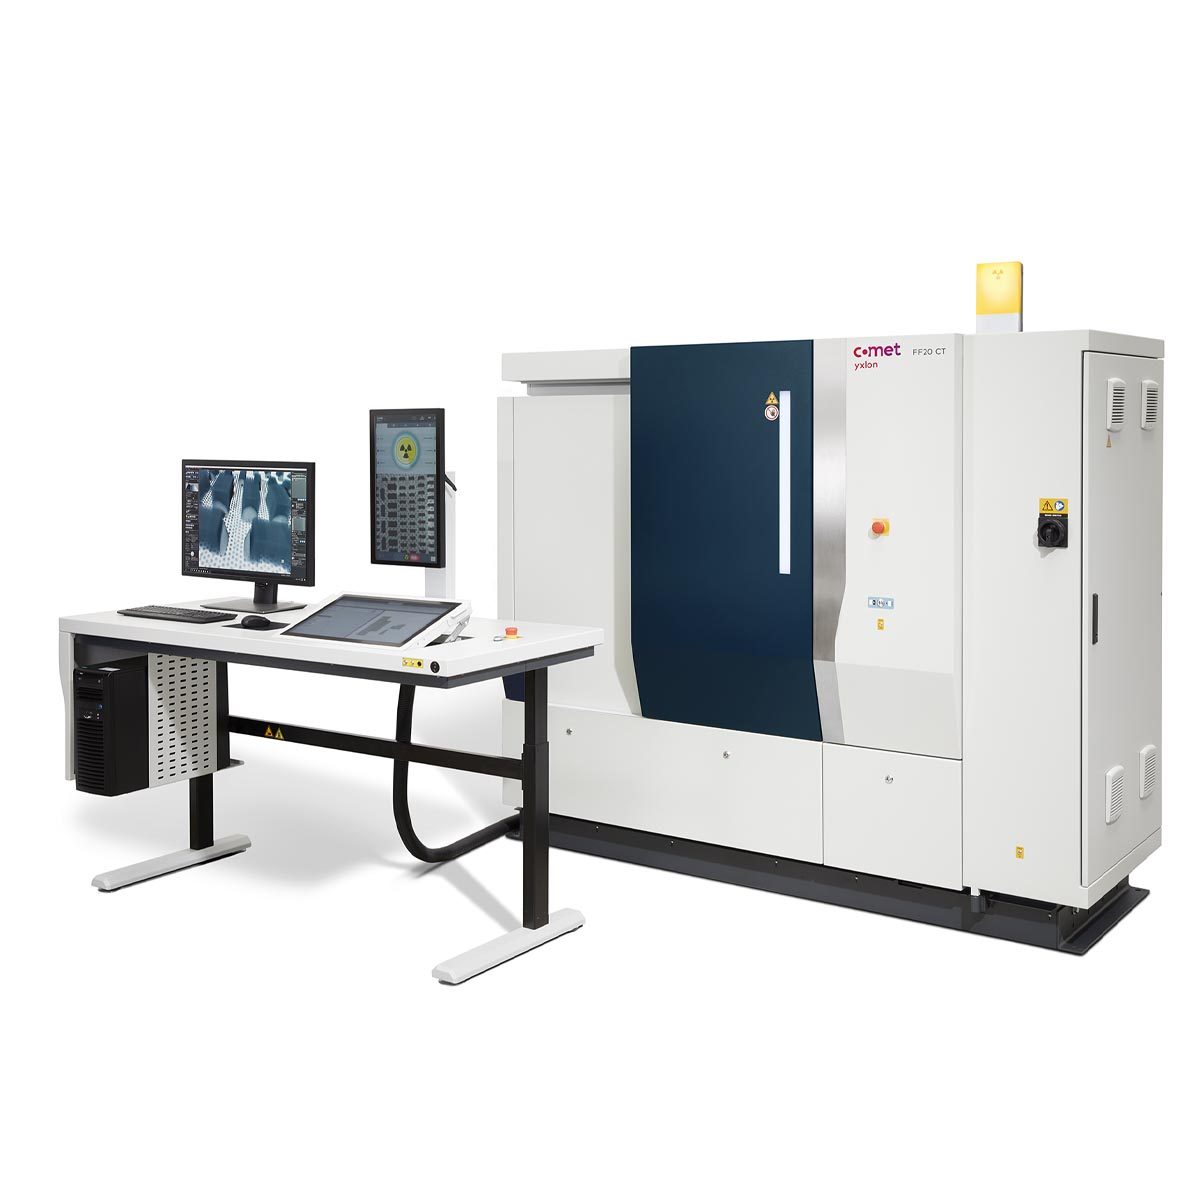 Coment Yxlon FF20 Computed Tomography inspection system